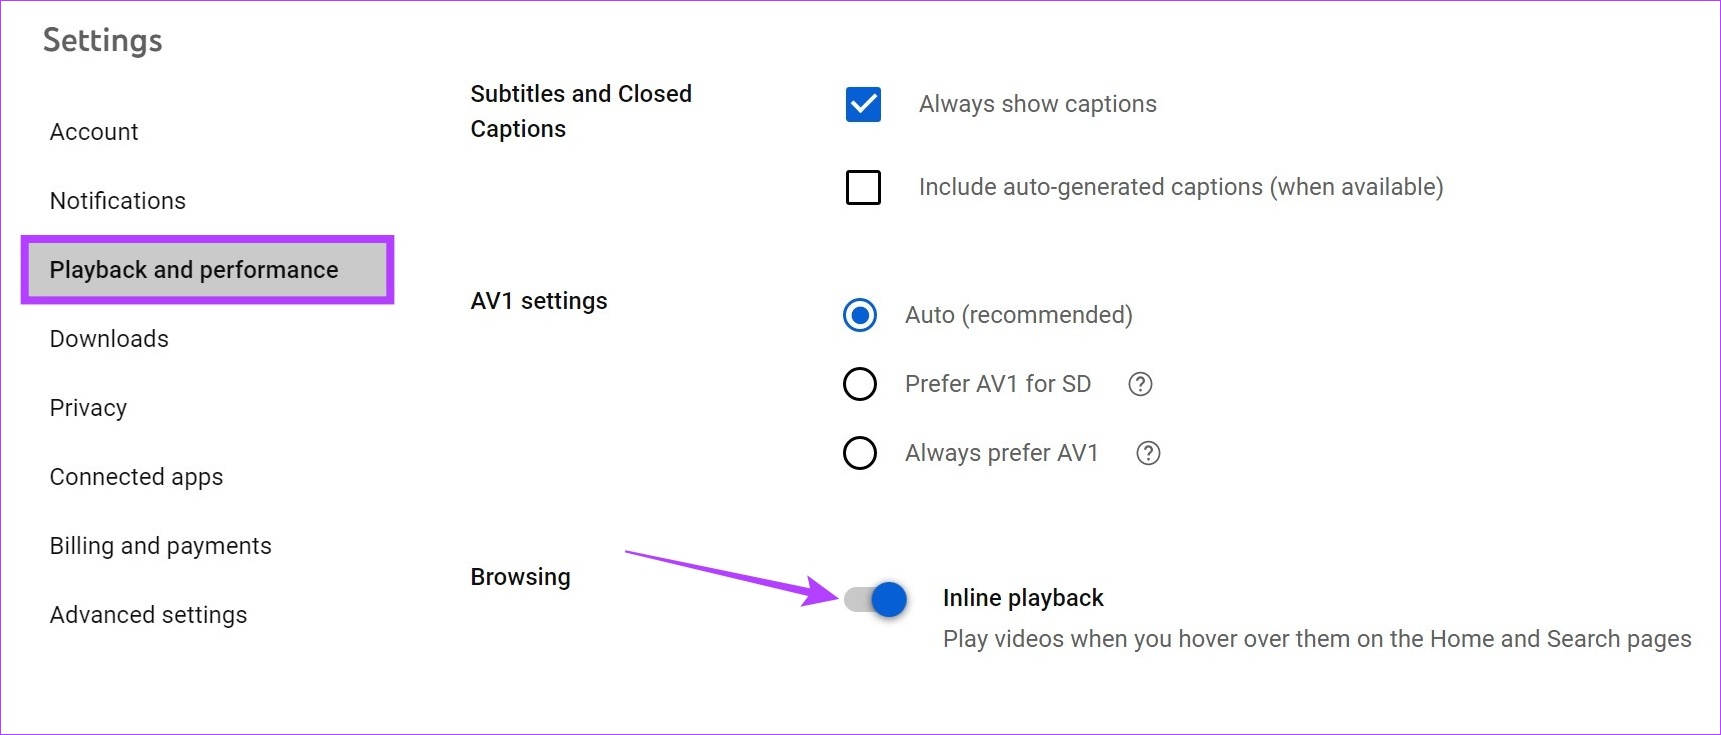 Click on Inline playback toggle to turn it off